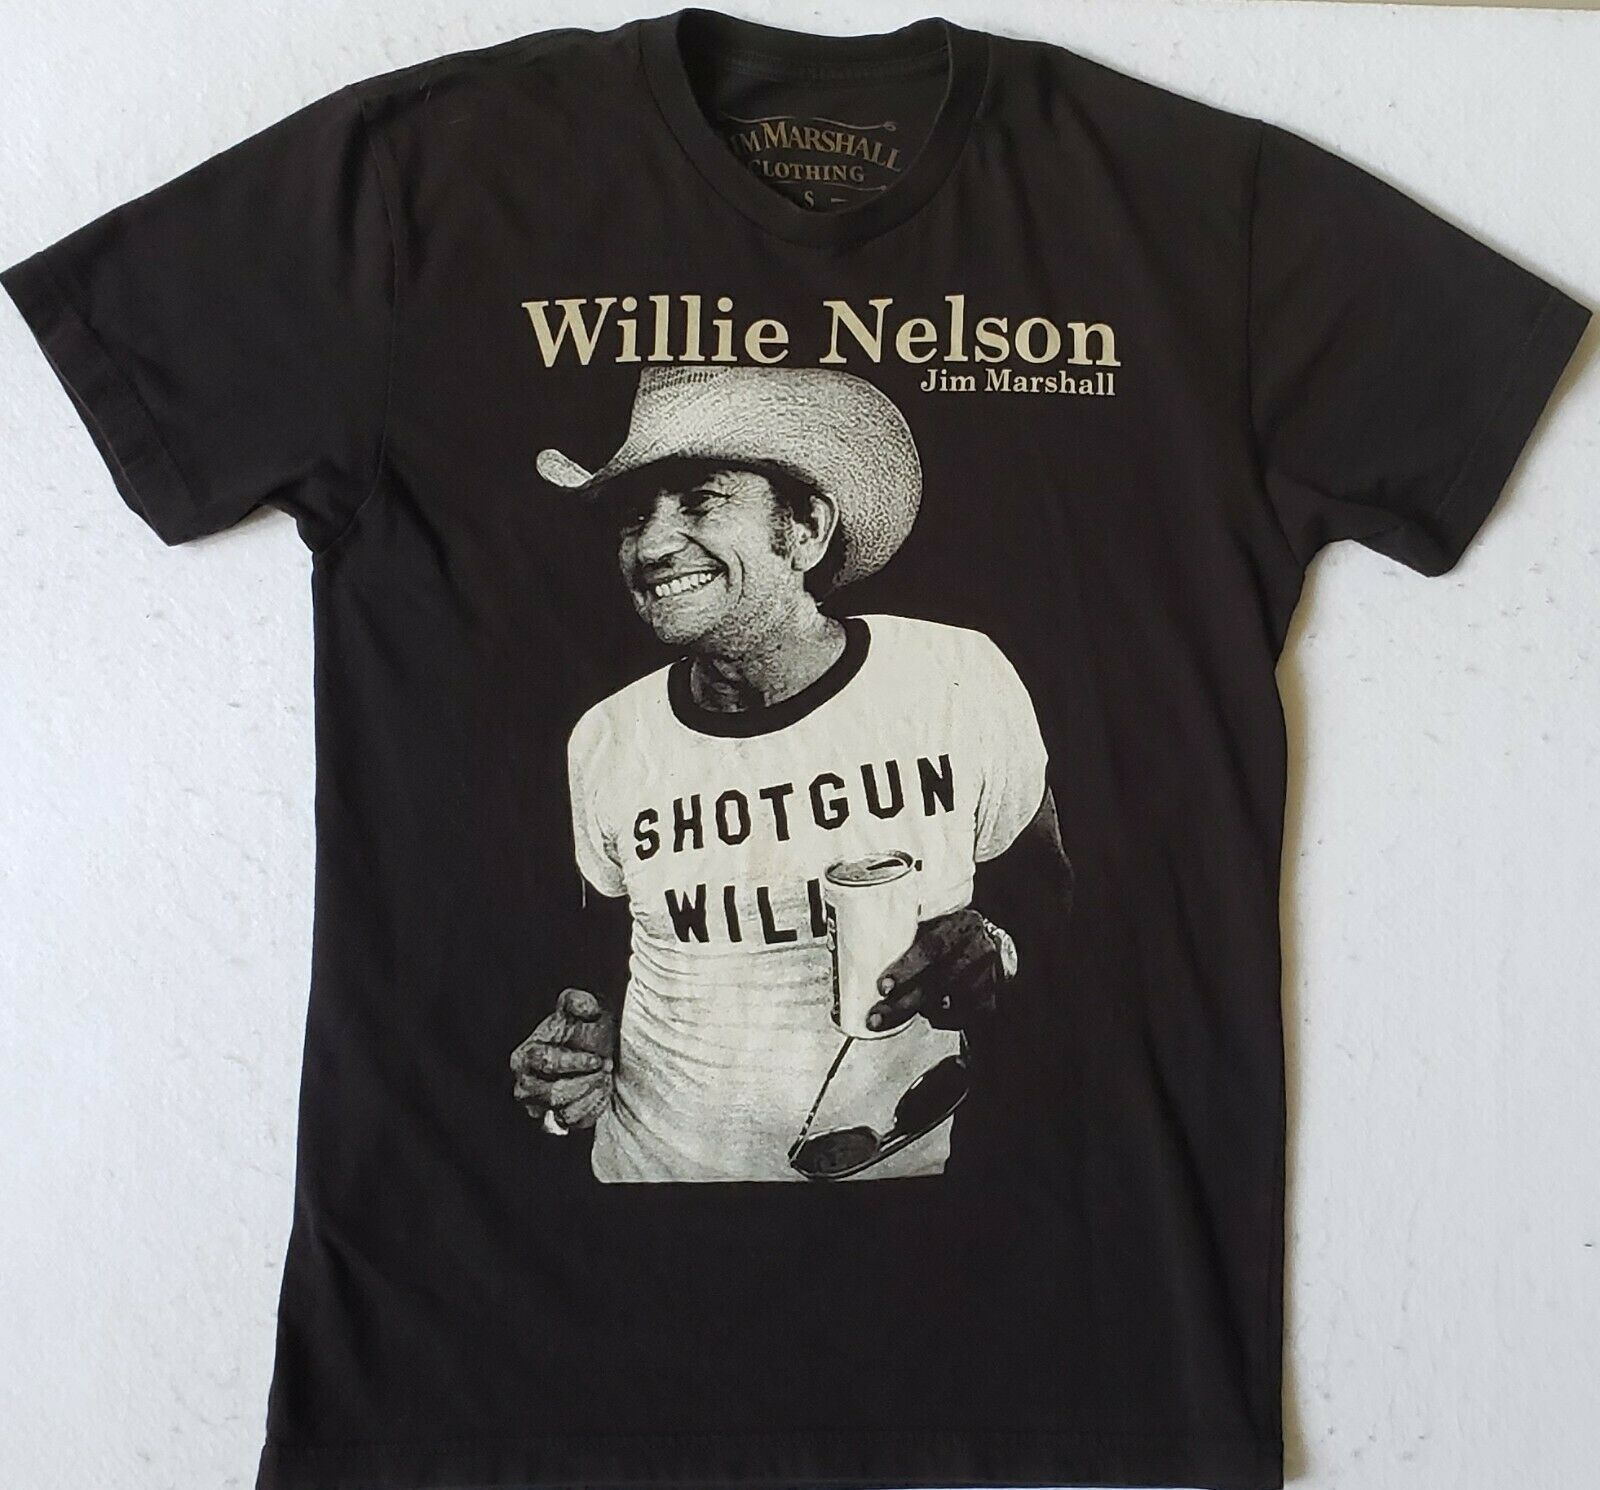 Willie Nelson Size Small Black T-shirt